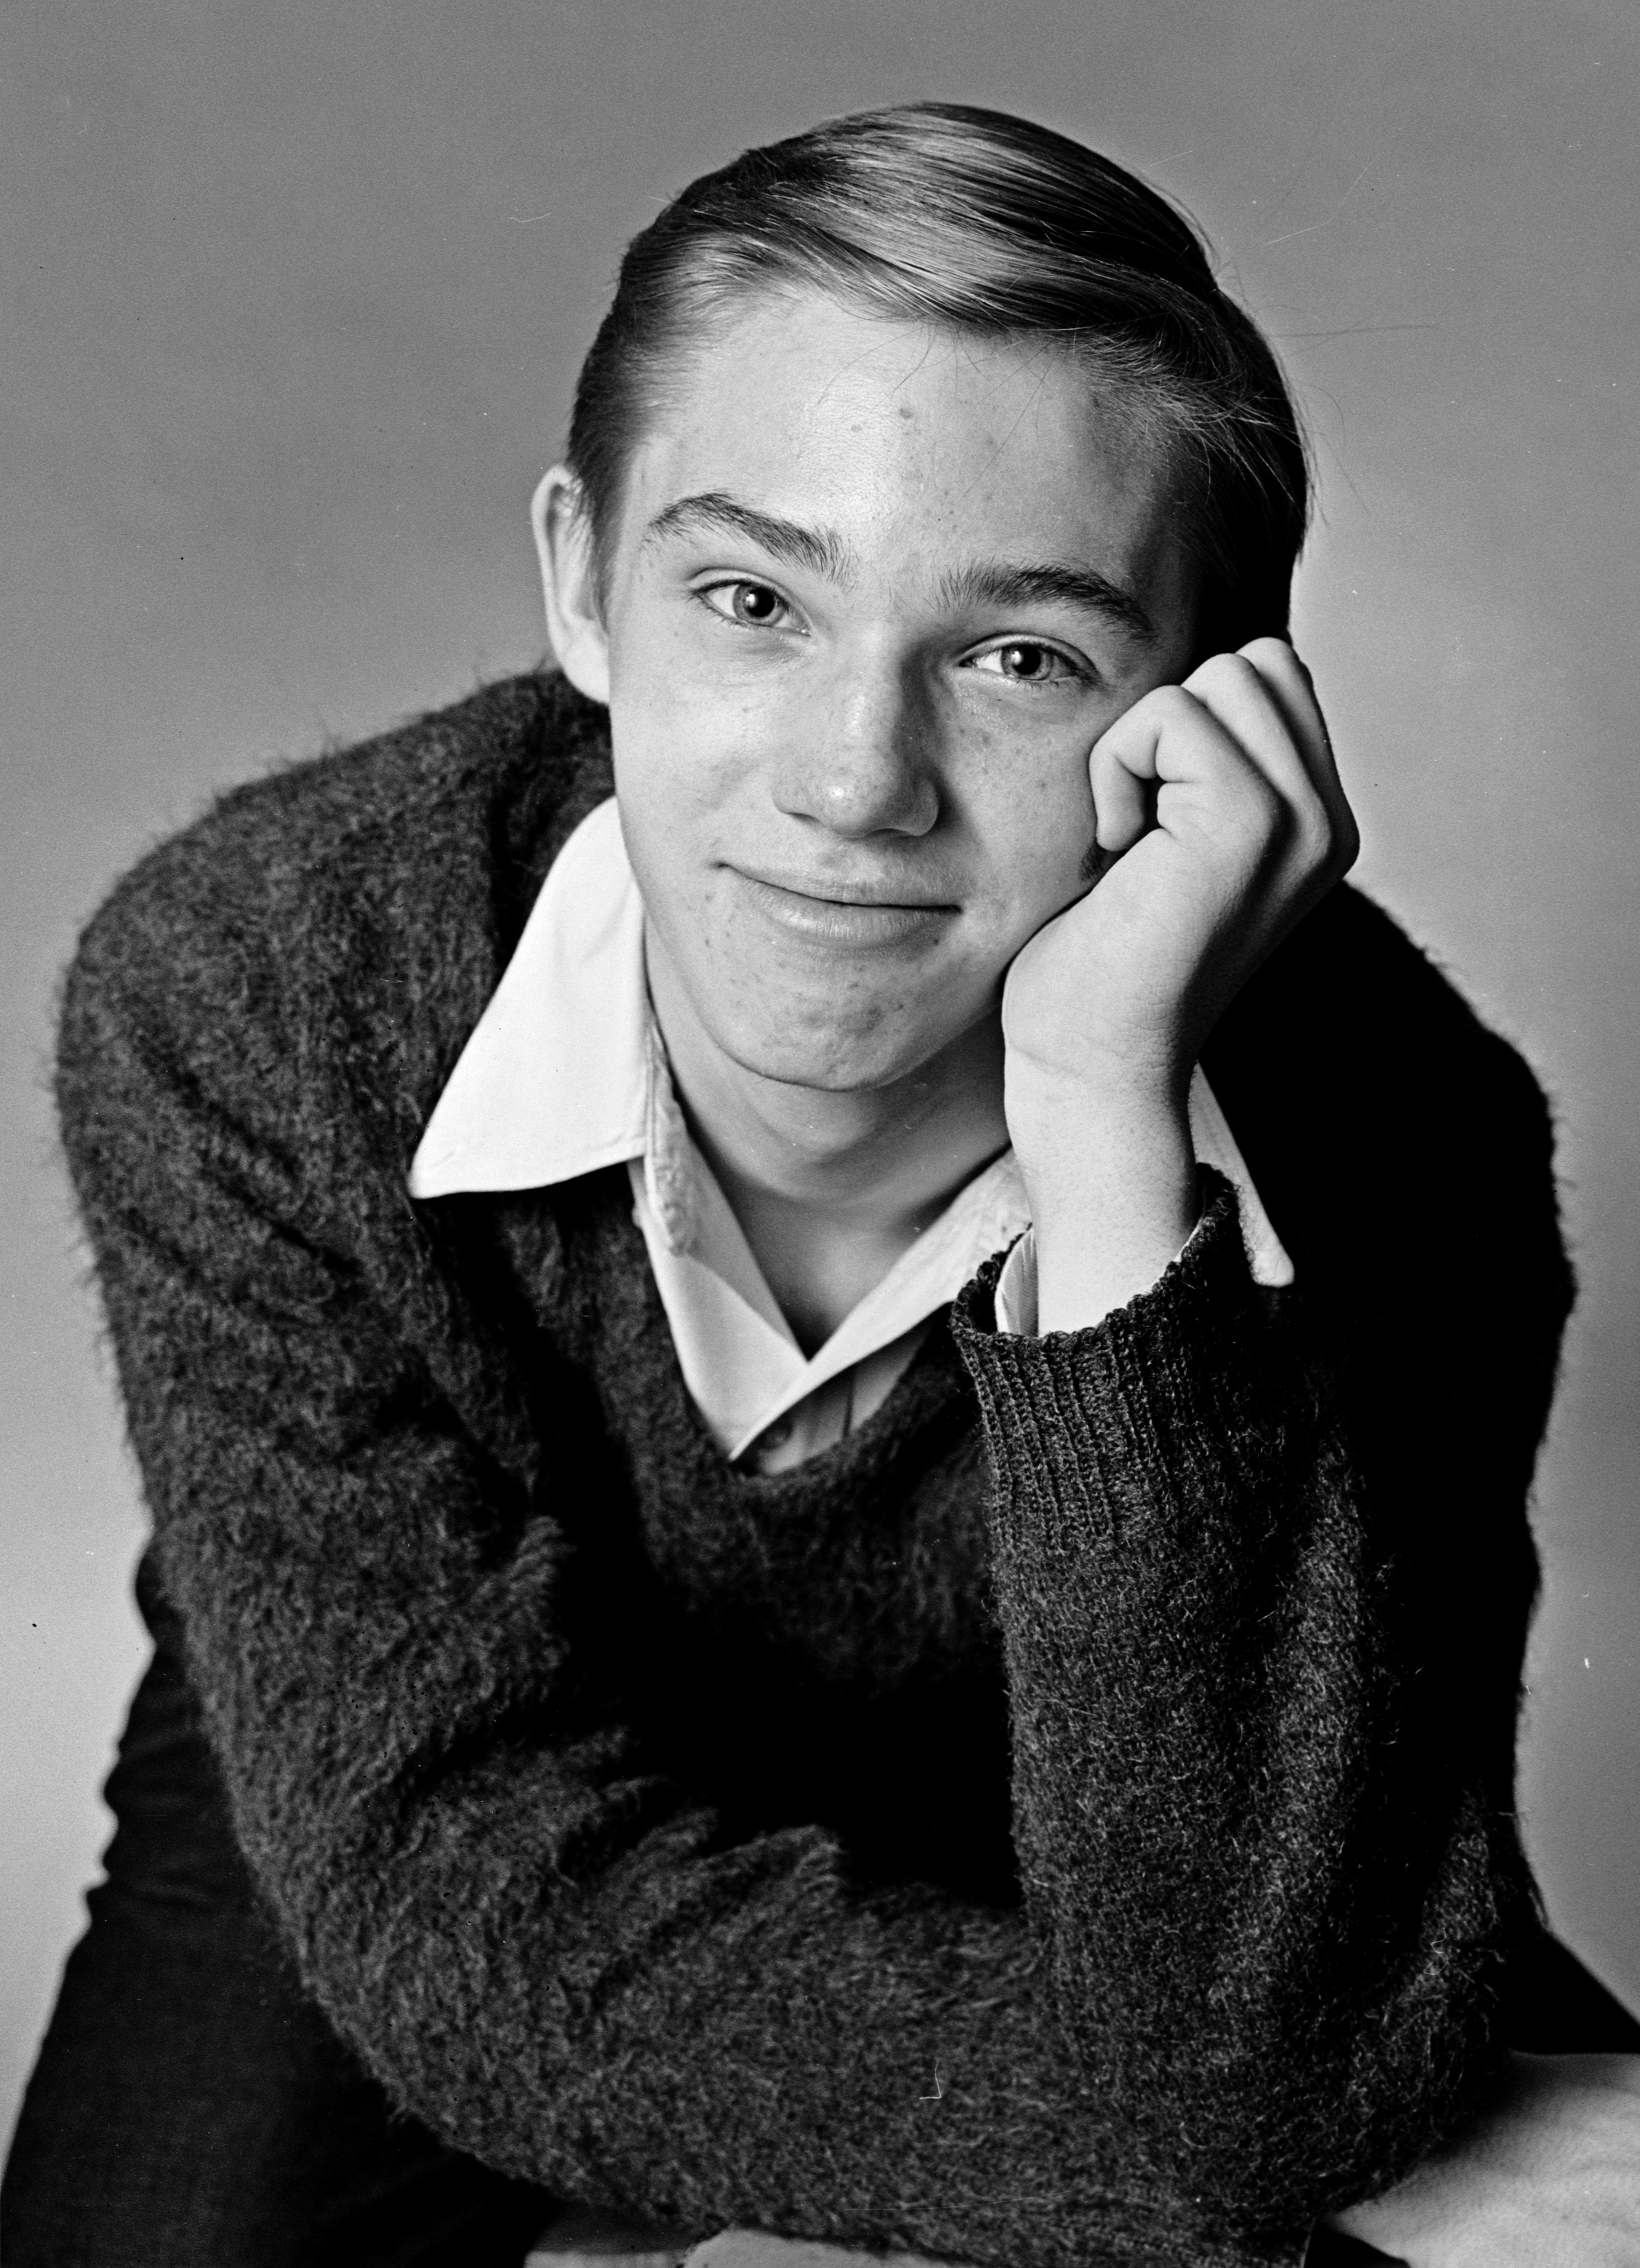 Richard Thomas photographed at age 14 in 1965. | Photo: Getty Images